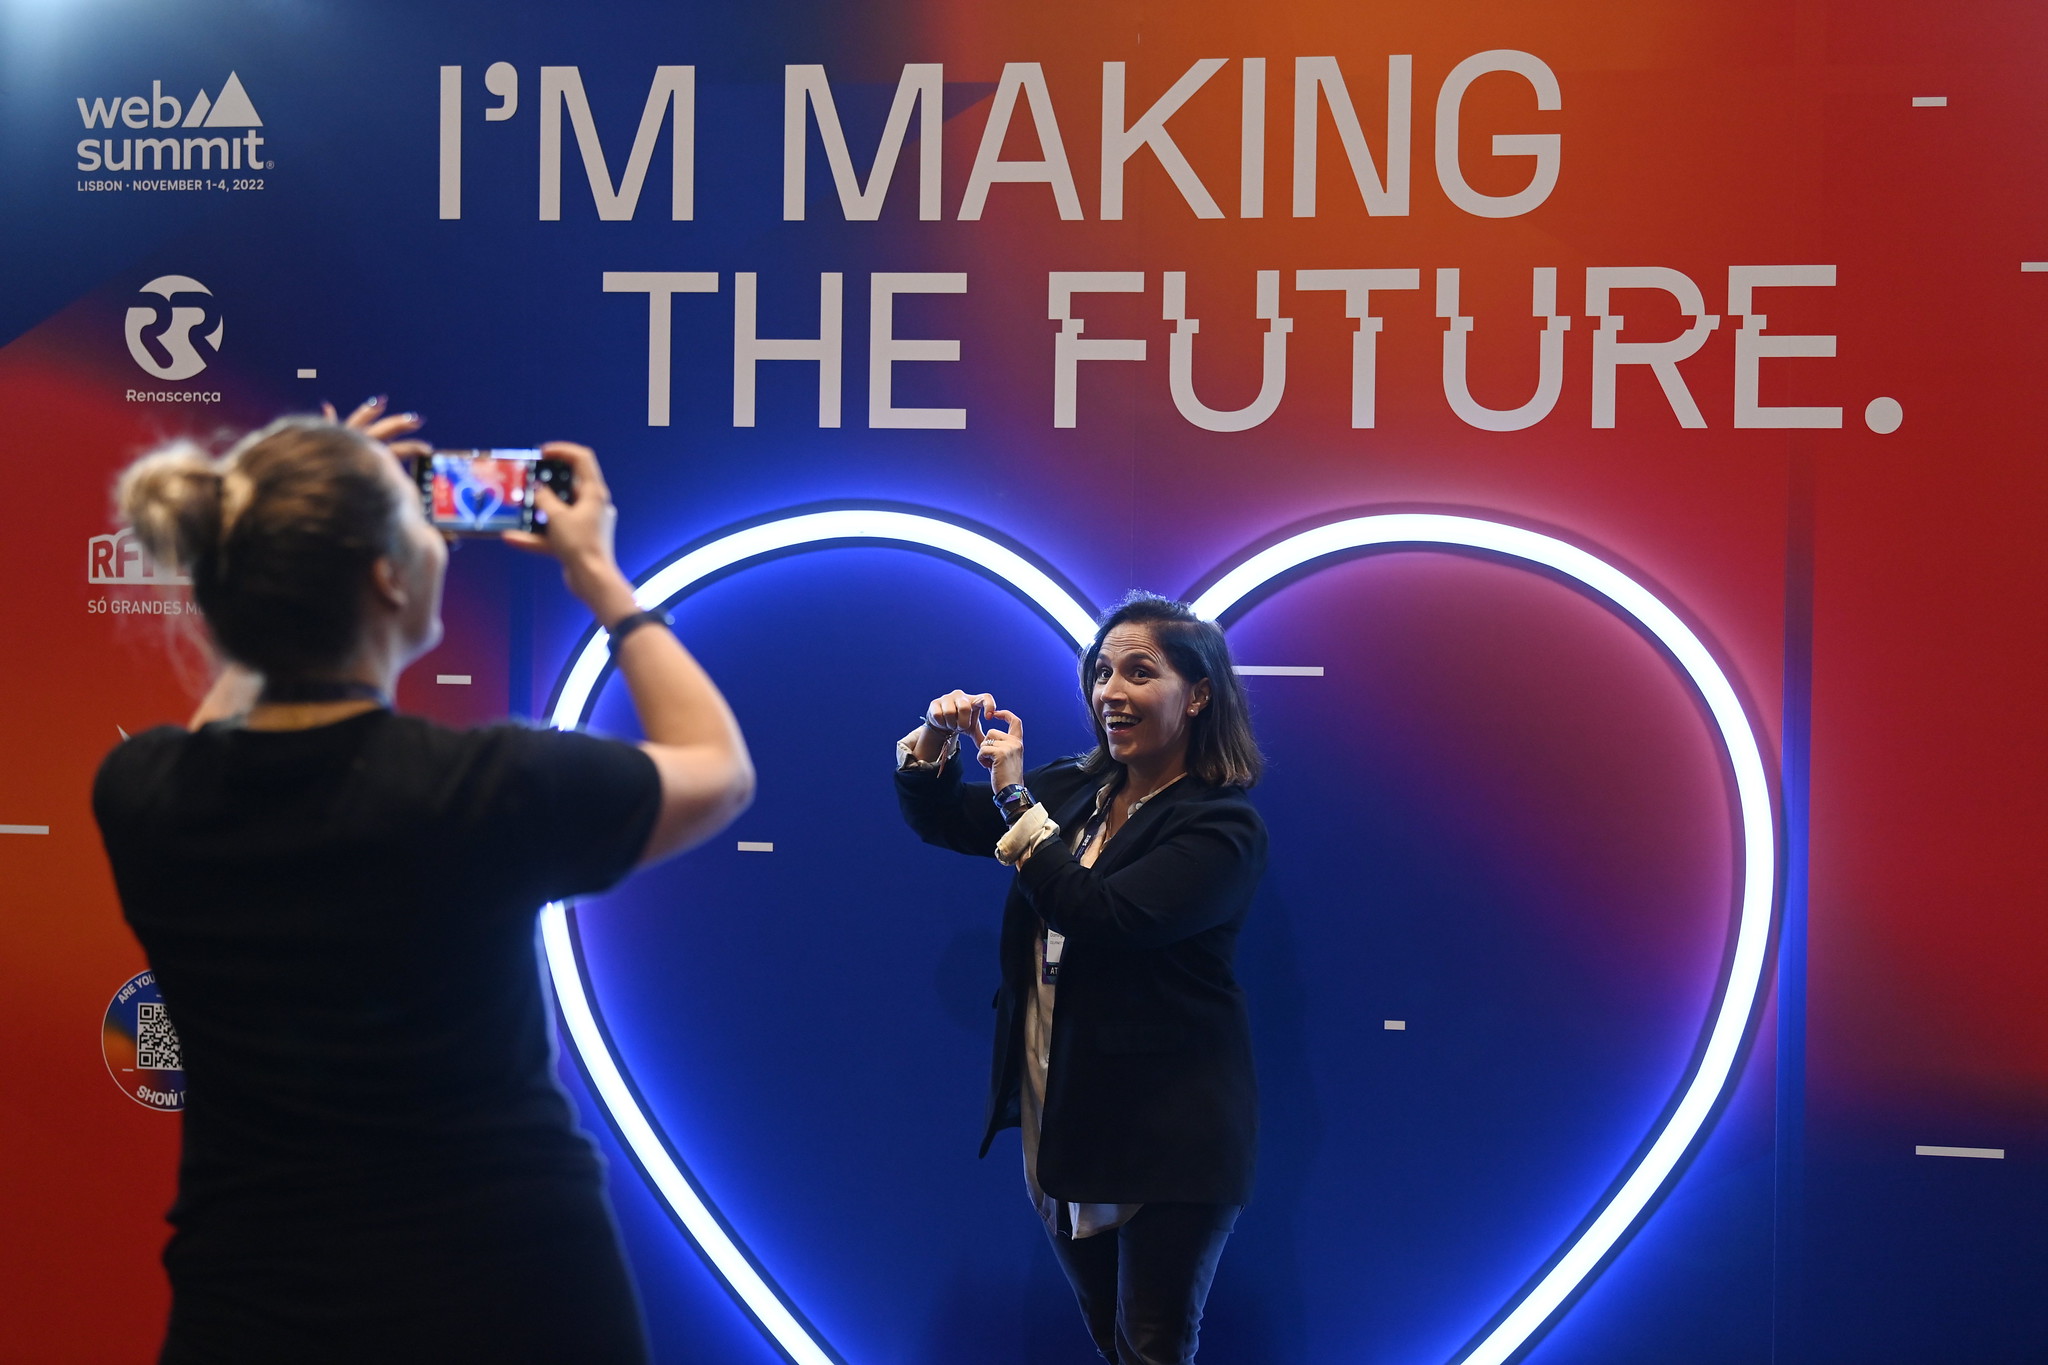 An attendee makes a heart shape with their hands in front of a wall with text that reads 'I'm making the future'.